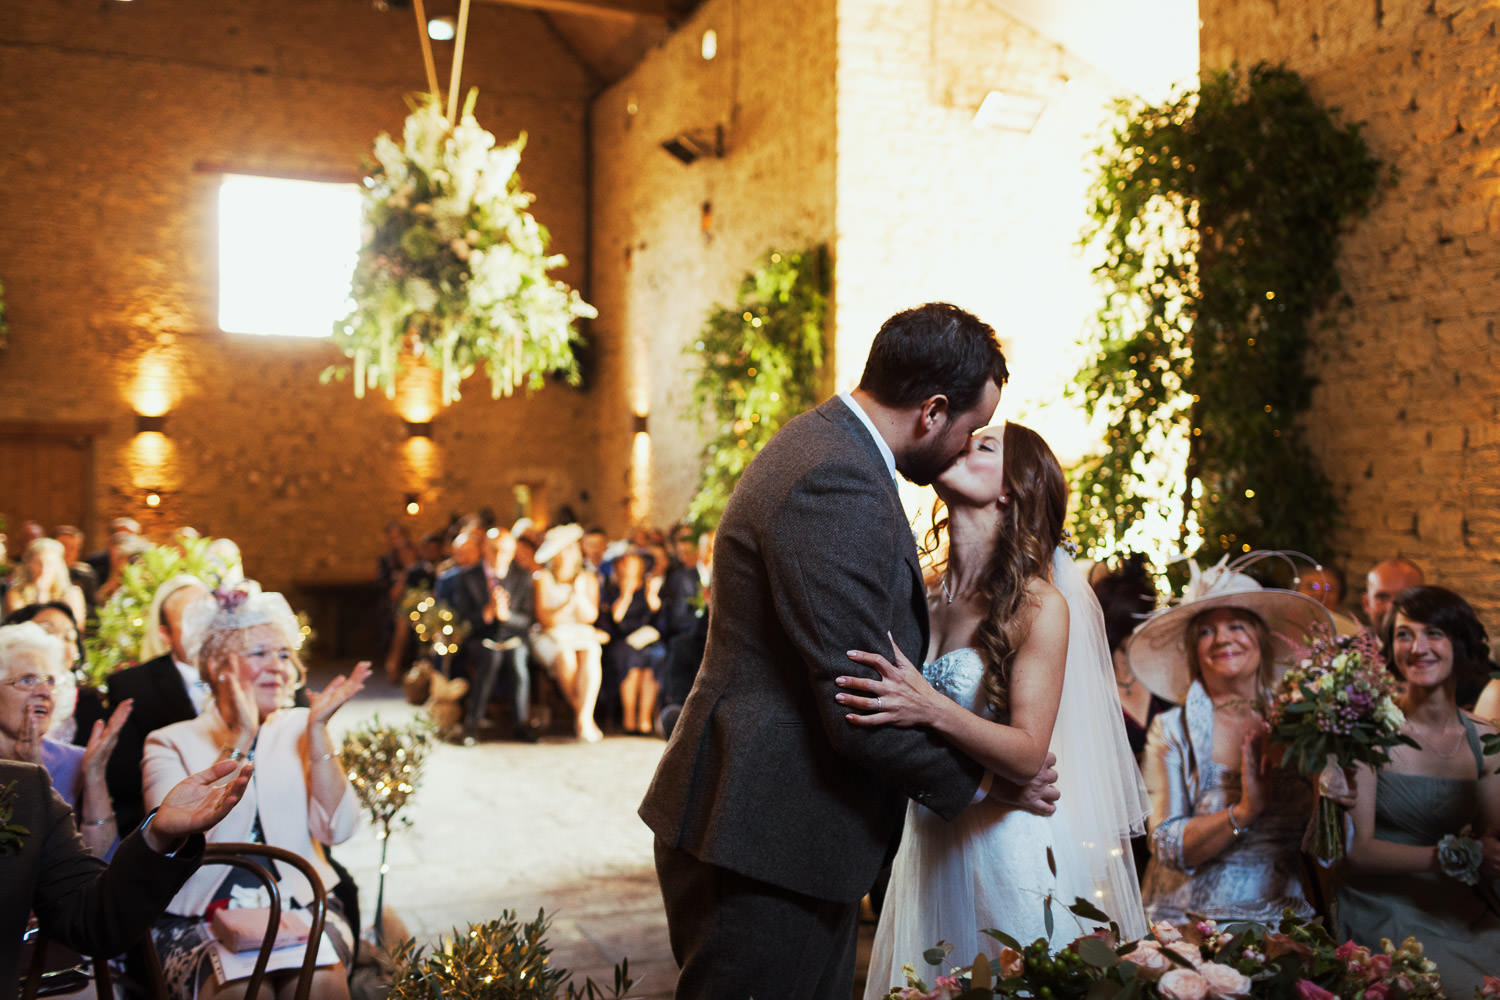 Bride and groom kiss during a wedding ceremony at Cripps Barn.